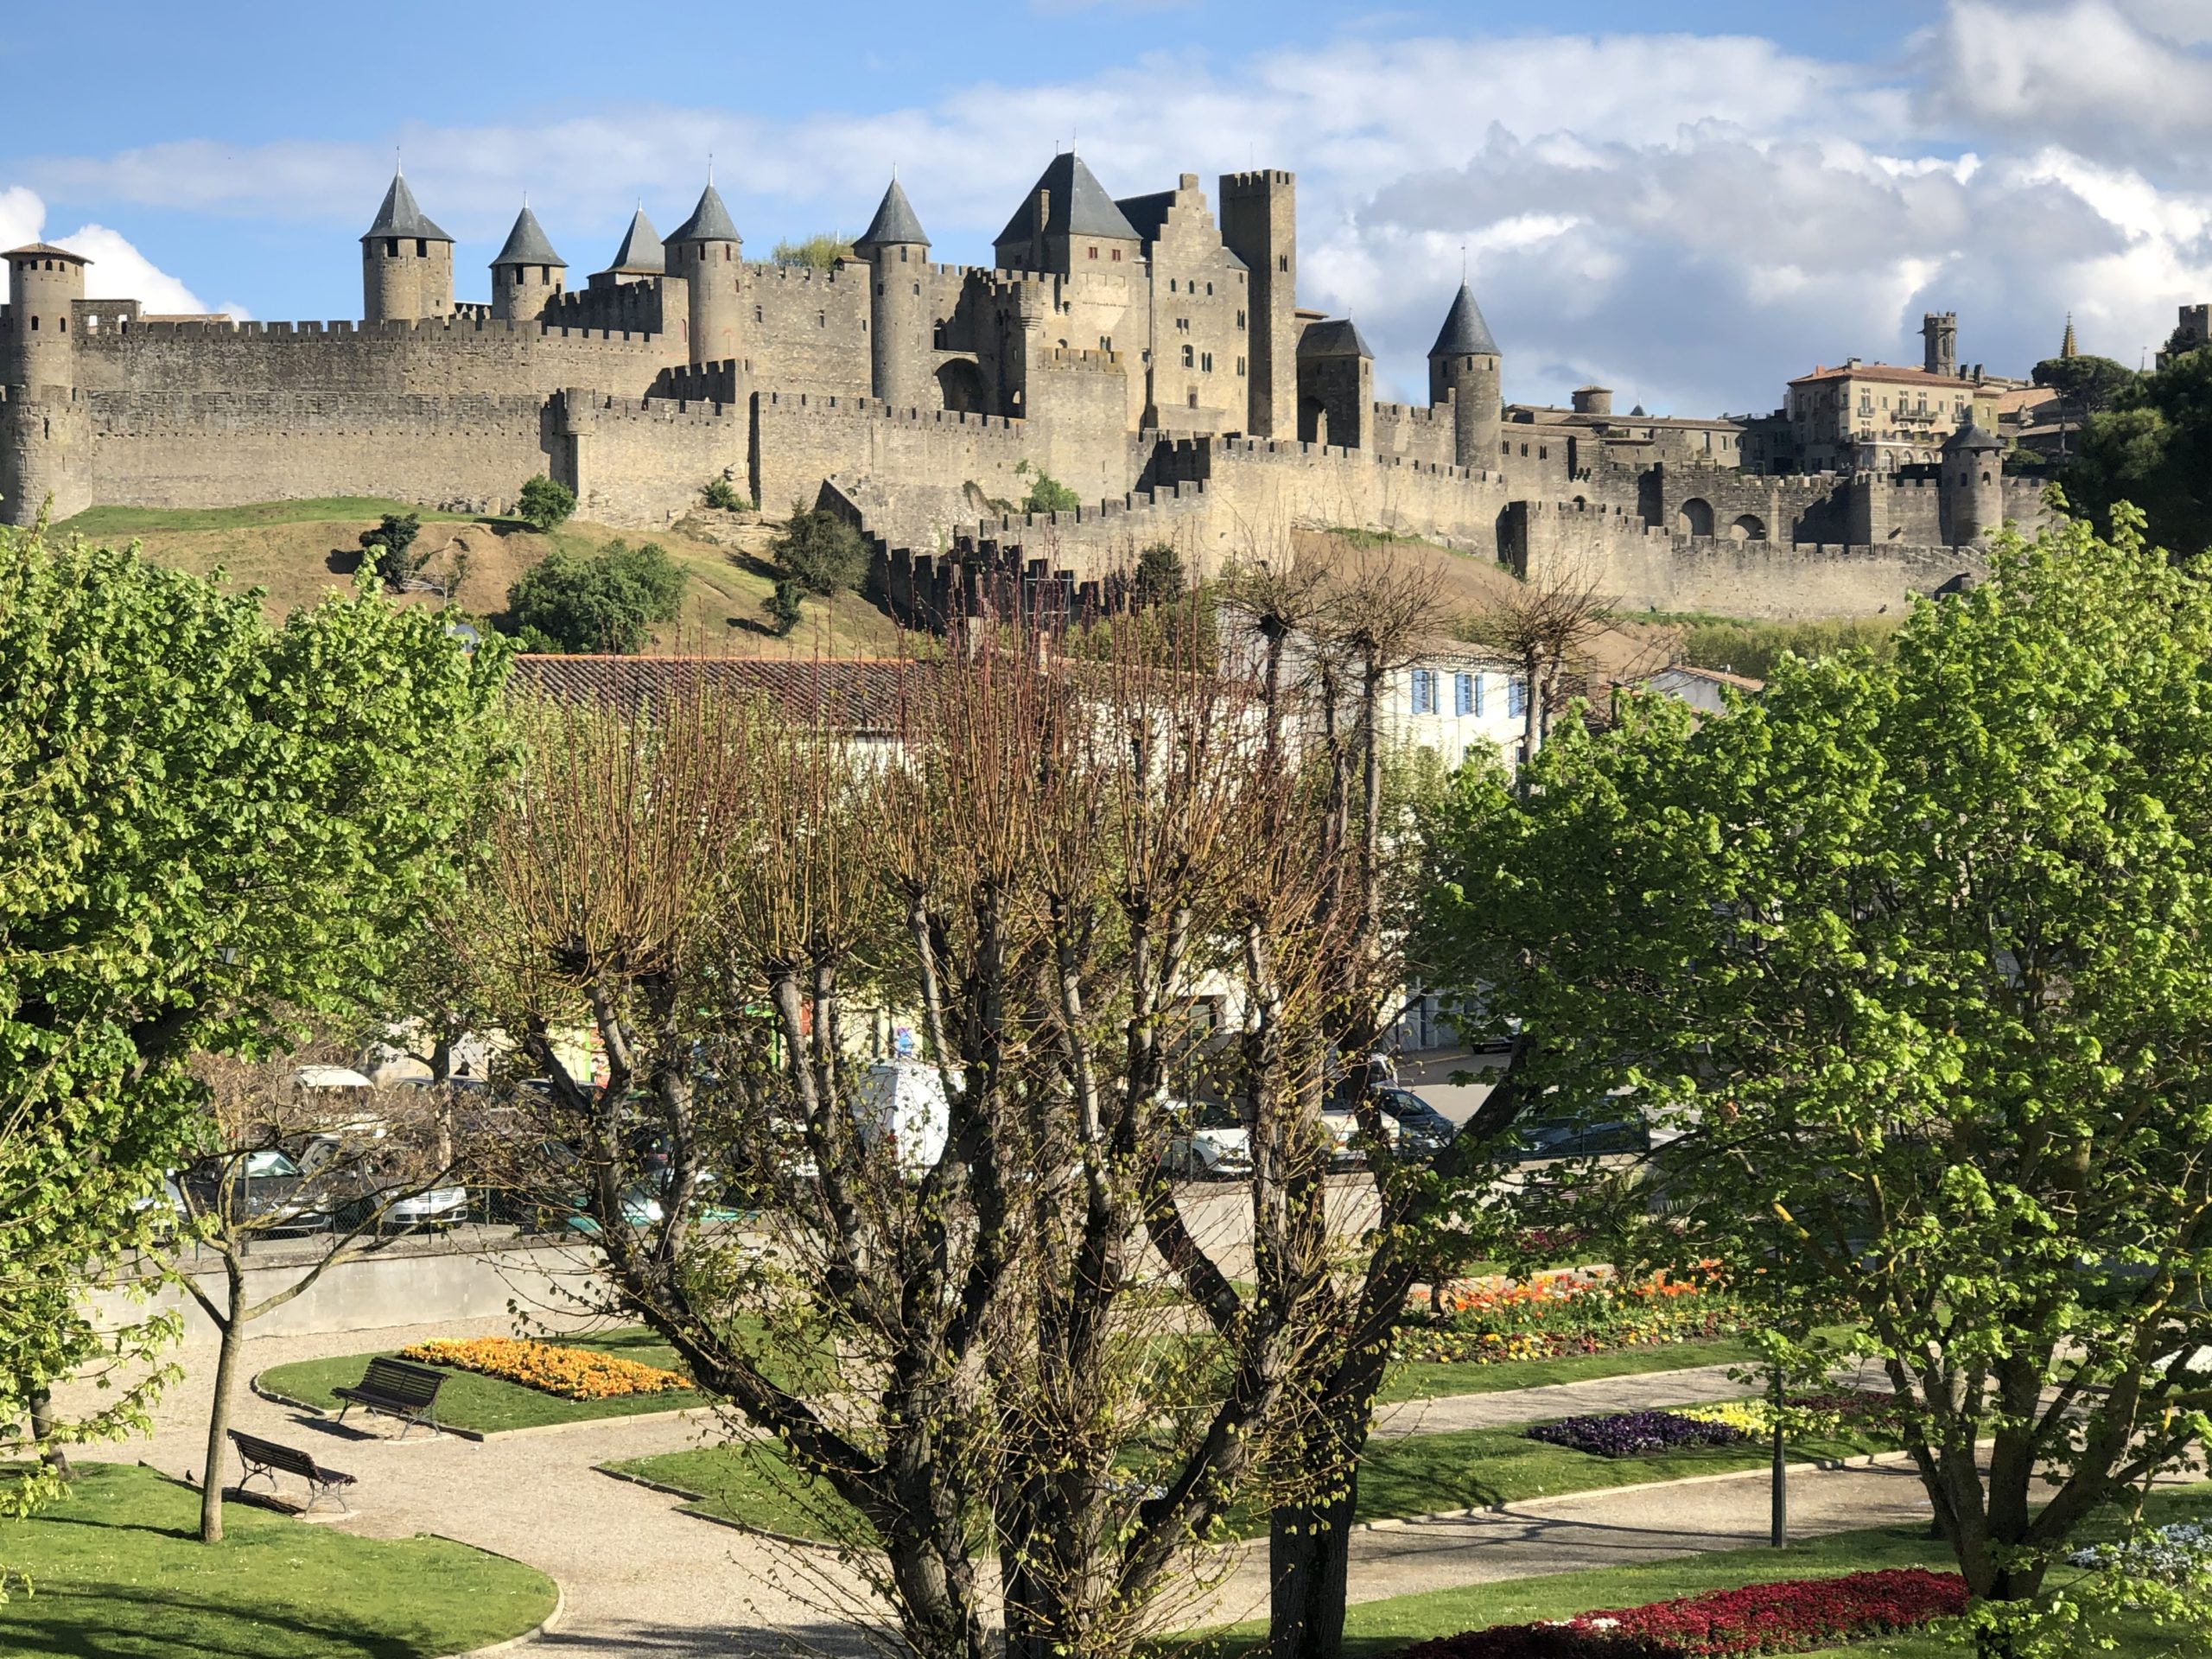 View of Carcassonne from Pont Vieux Carcassonne April 2019